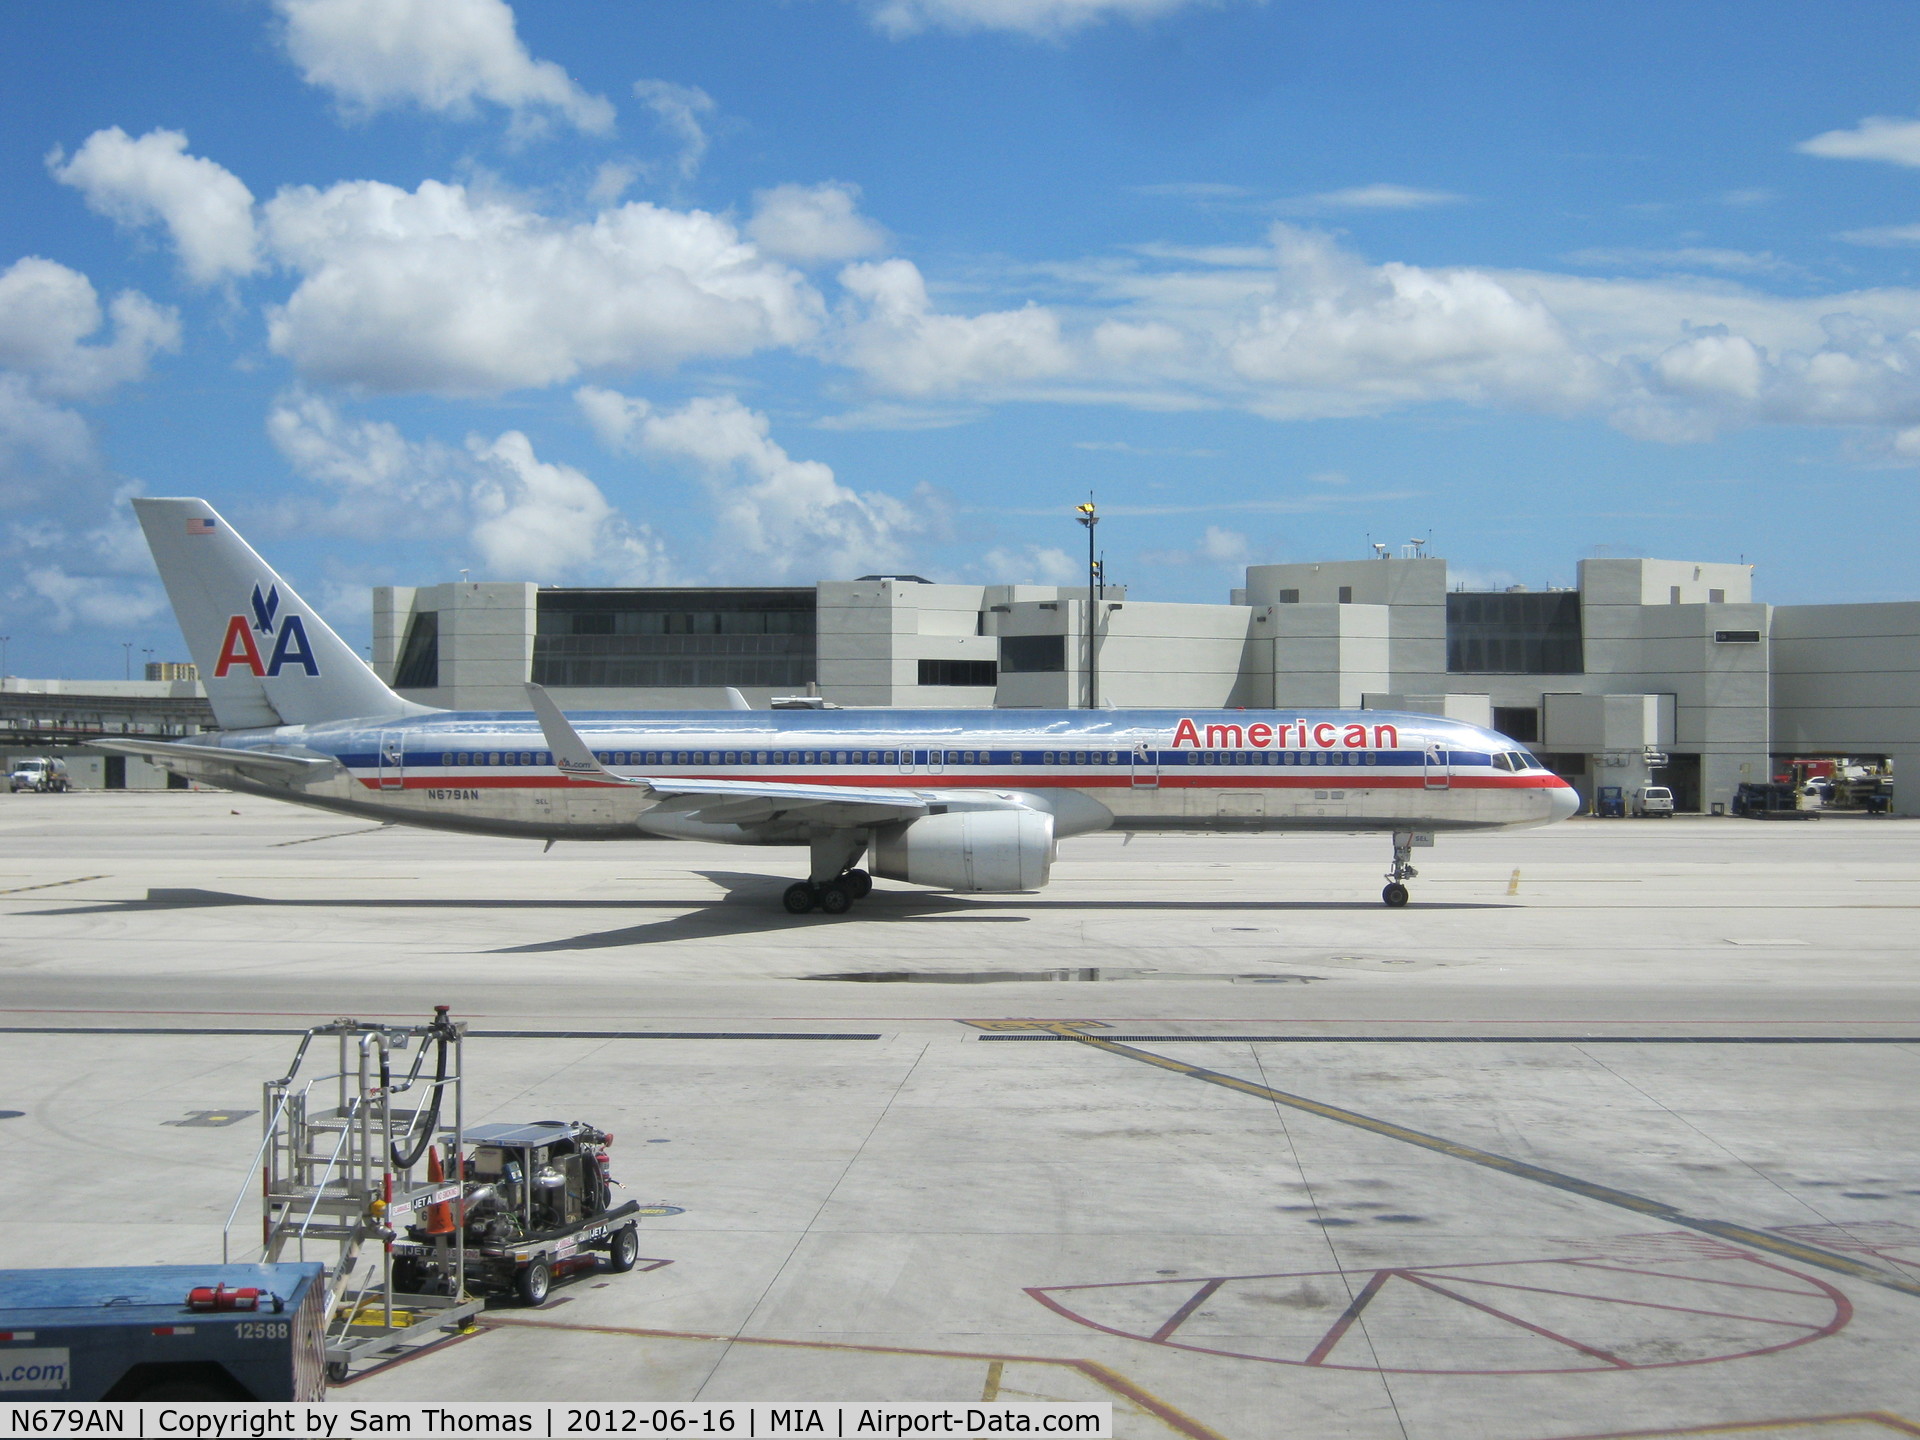 N679AN, 1999 Boeing 757-223F C/N 29589, N679AN (American Airlines Boeing 757-200) on the tarmac at Miami.